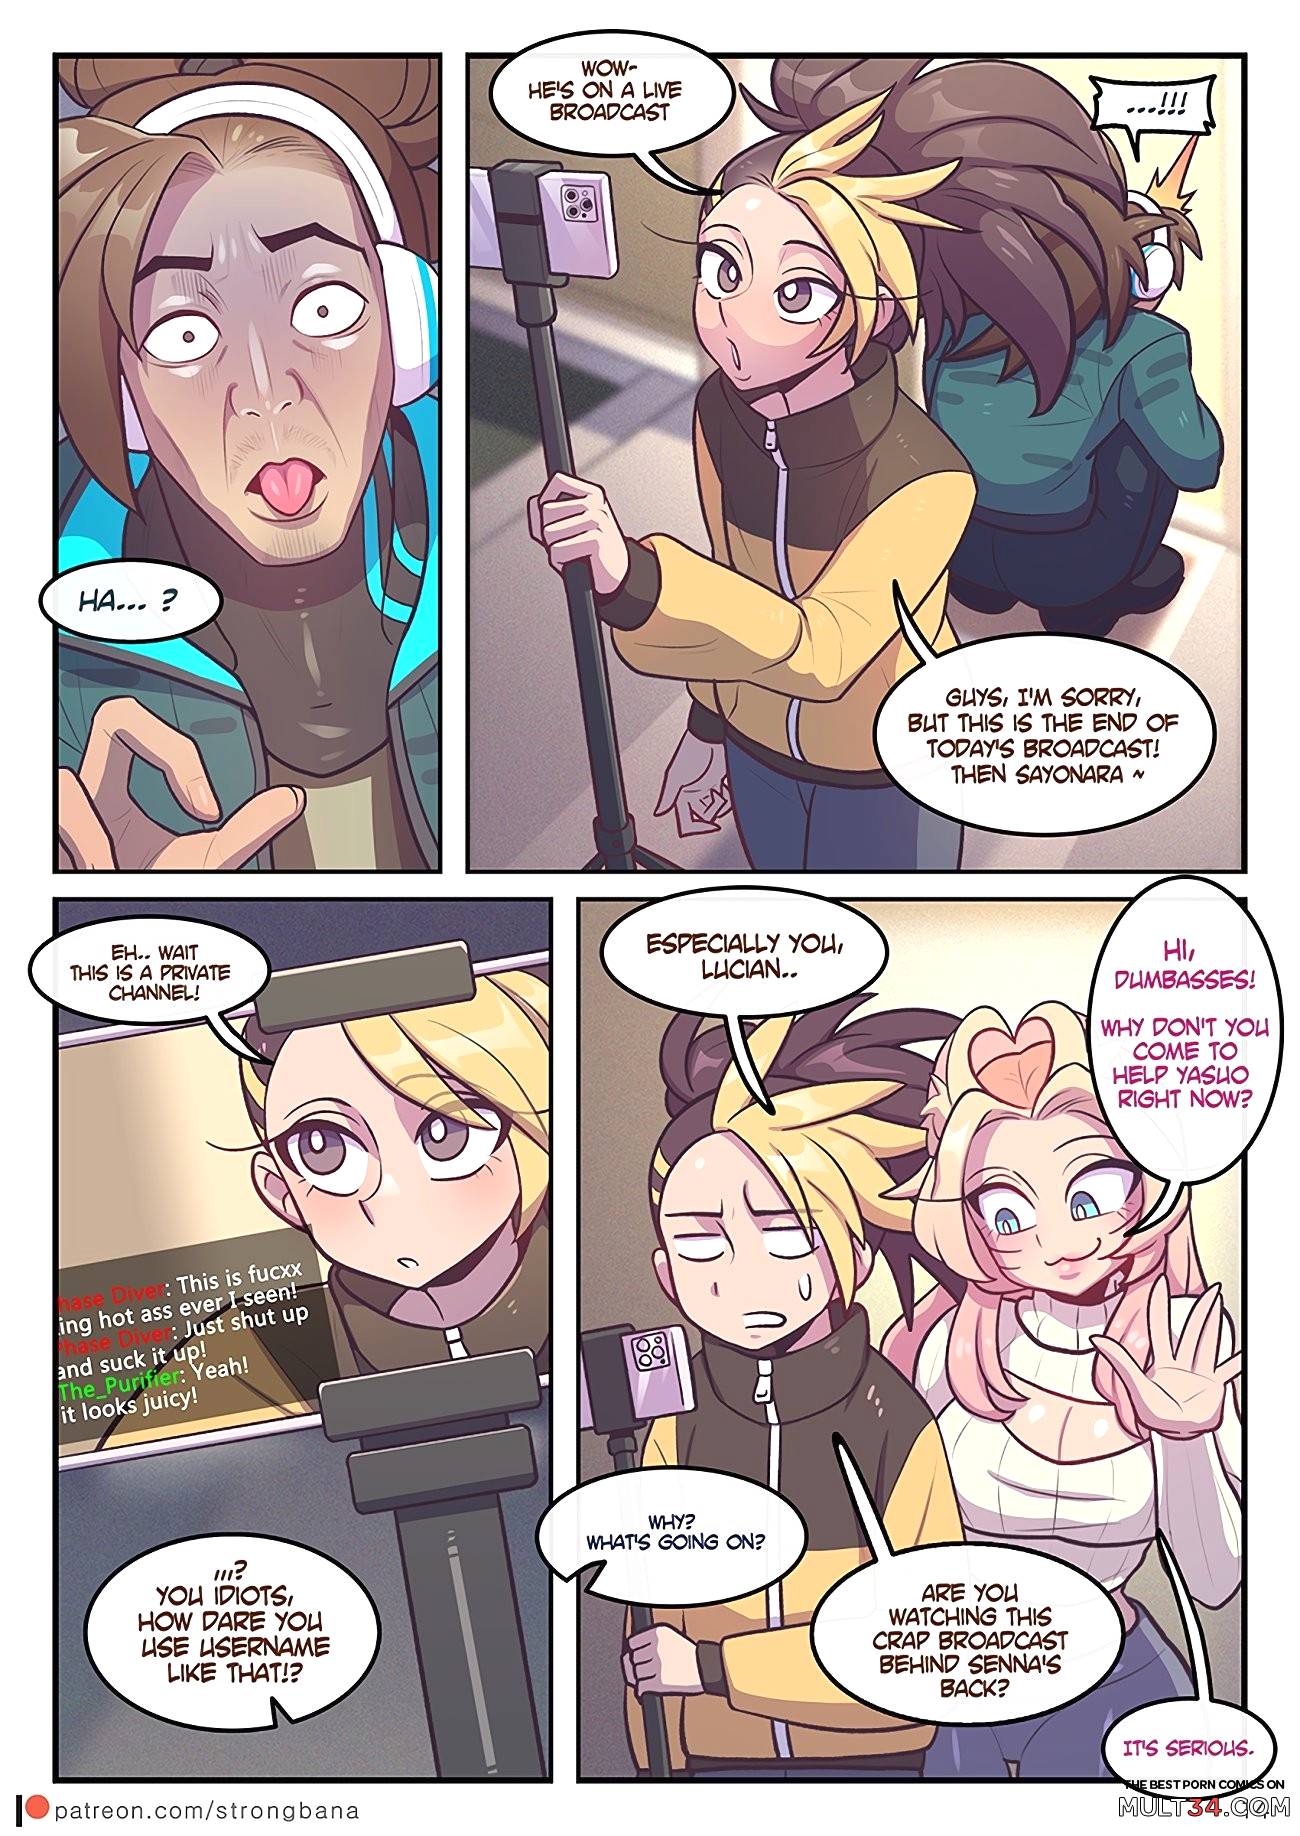 Strong Bana - Live Streaming (League of Legends) page 16